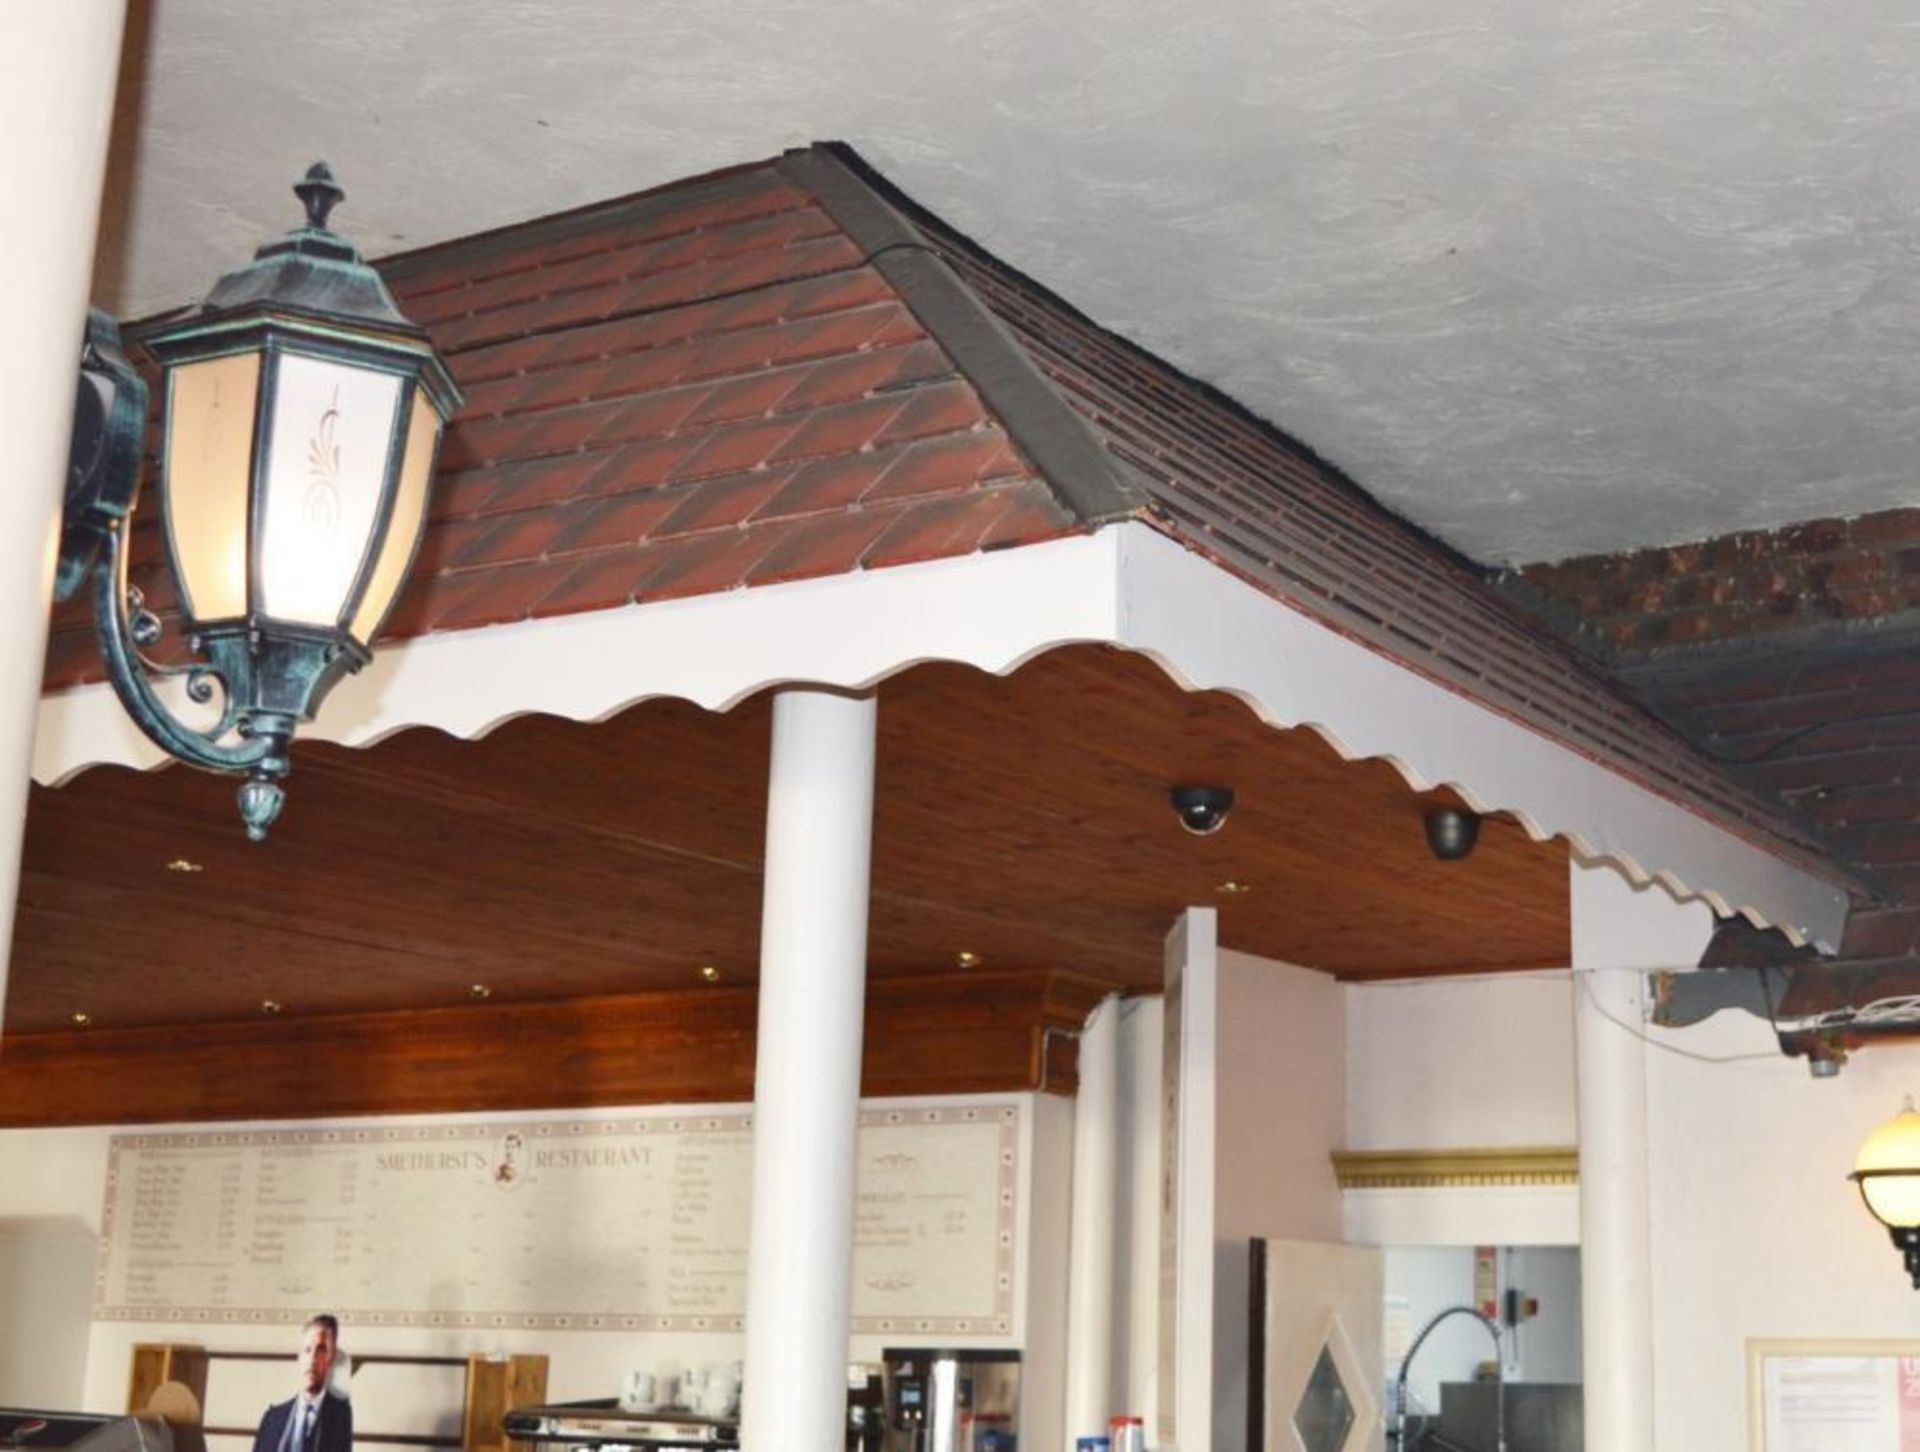 1 x Smethursts Restaurant Overhead Canopy With Ornate Pillars and Downlights - H370 x W980 x D500/28 - Image 6 of 11